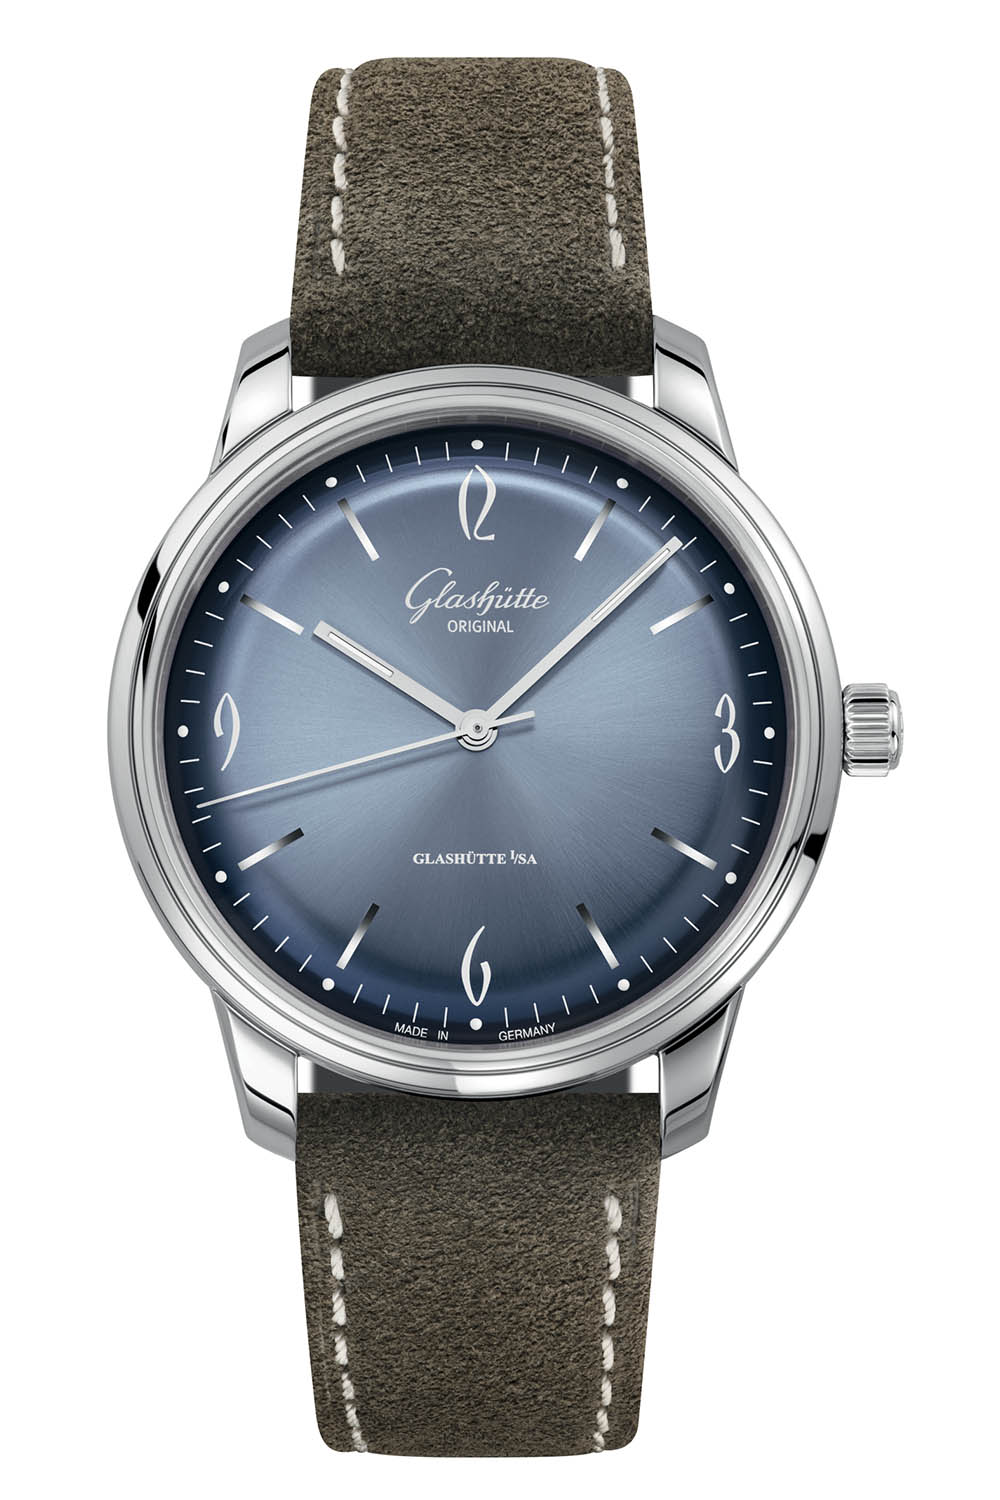 Glashutte Original Sixties and Sixities Chronograph Annual Edition 2020 Glacier Blue - 7